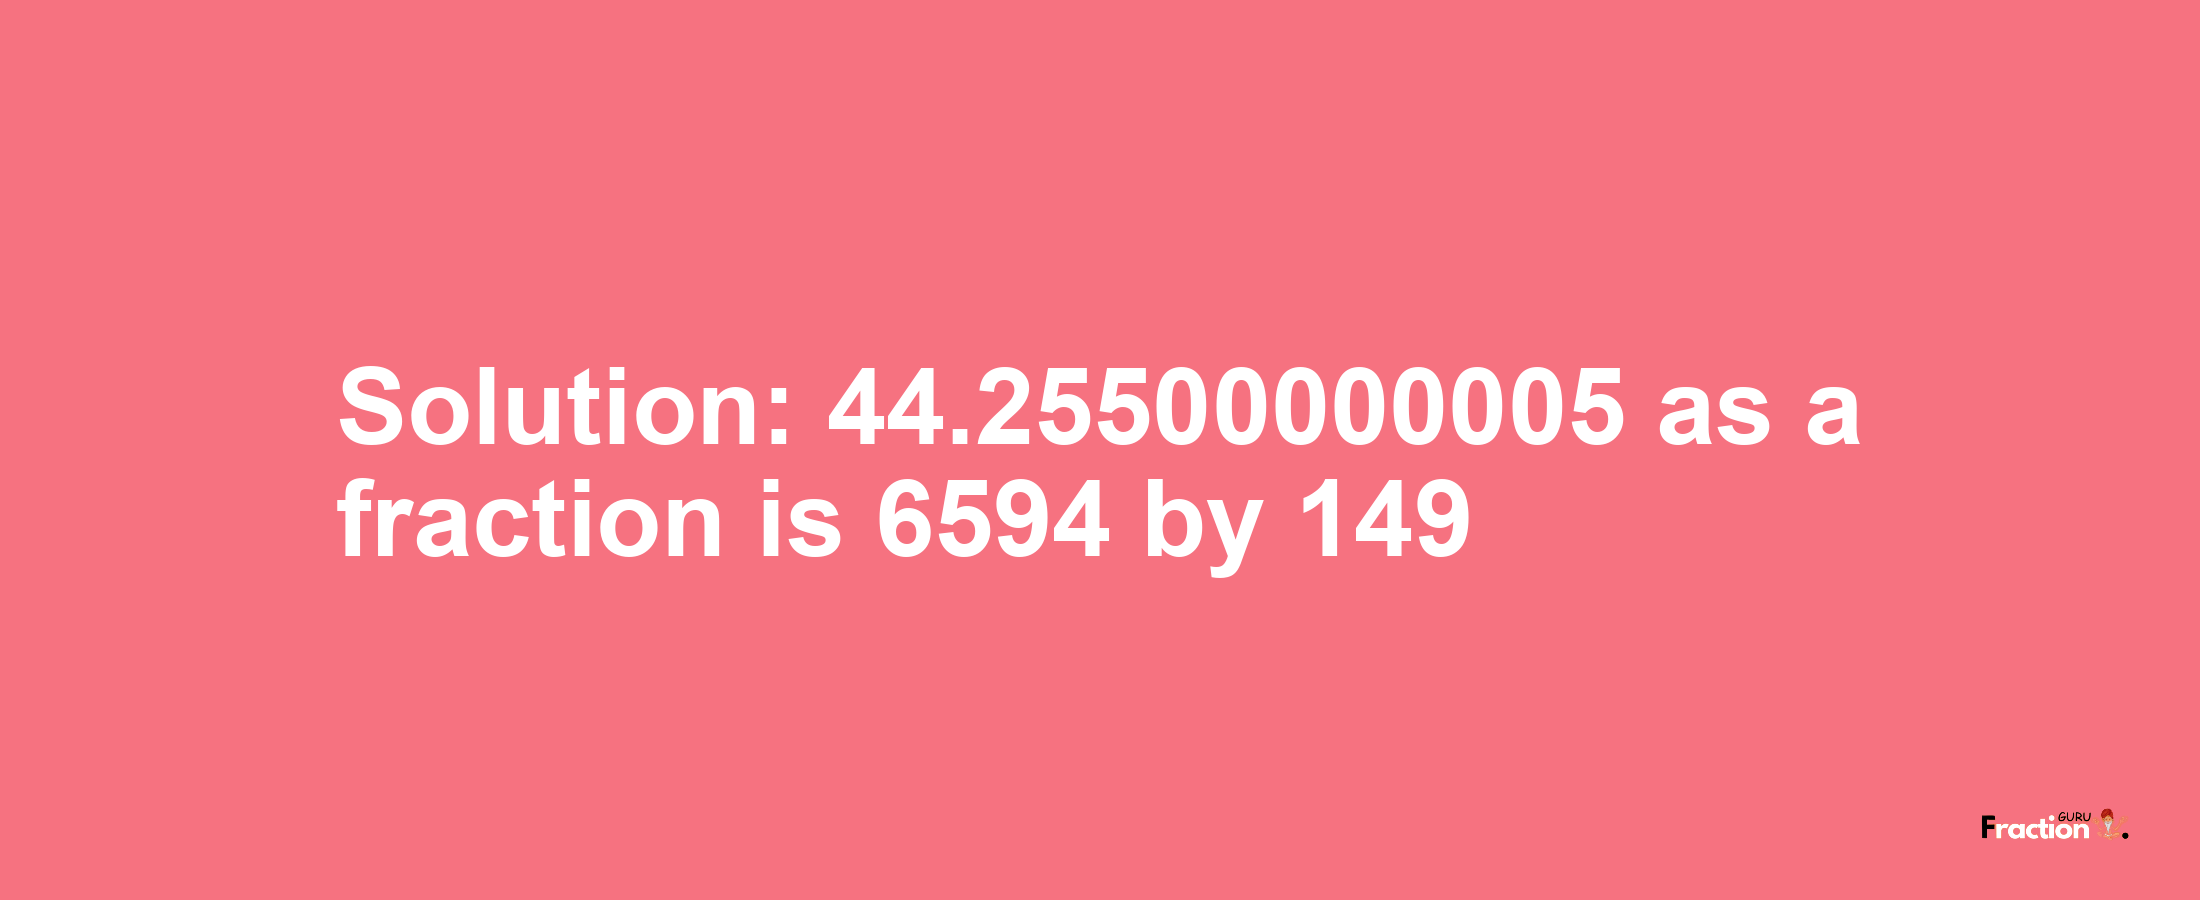 Solution:44.25500000005 as a fraction is 6594/149